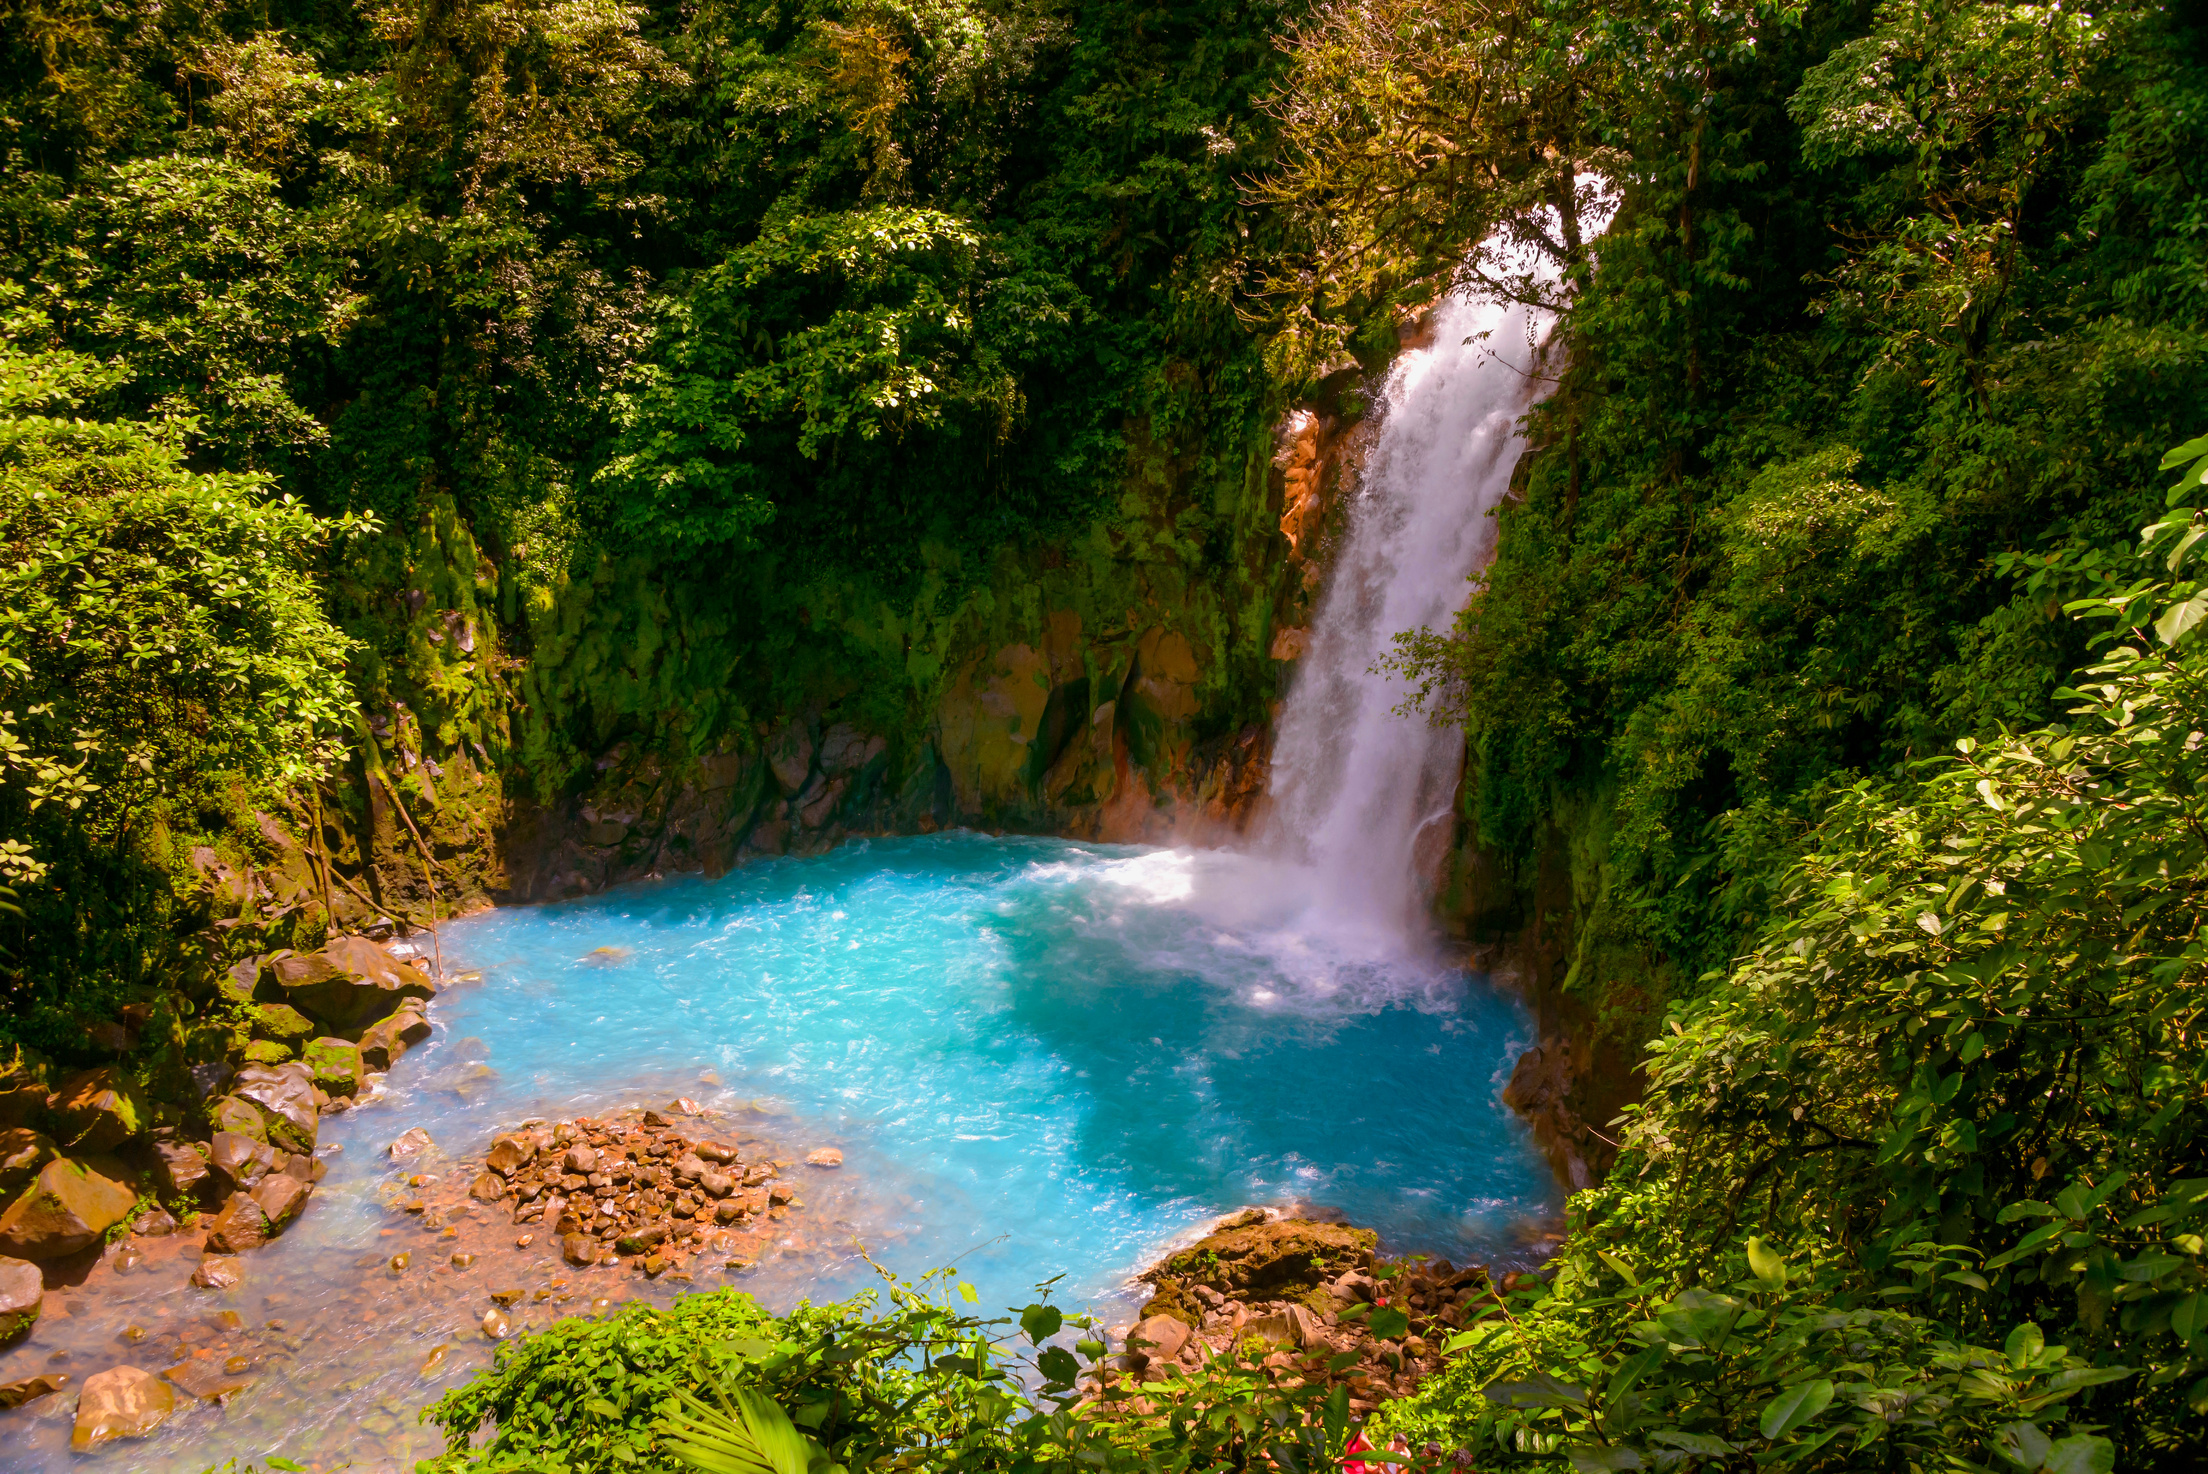 Waterfall on The Celeste River in Costa Rica